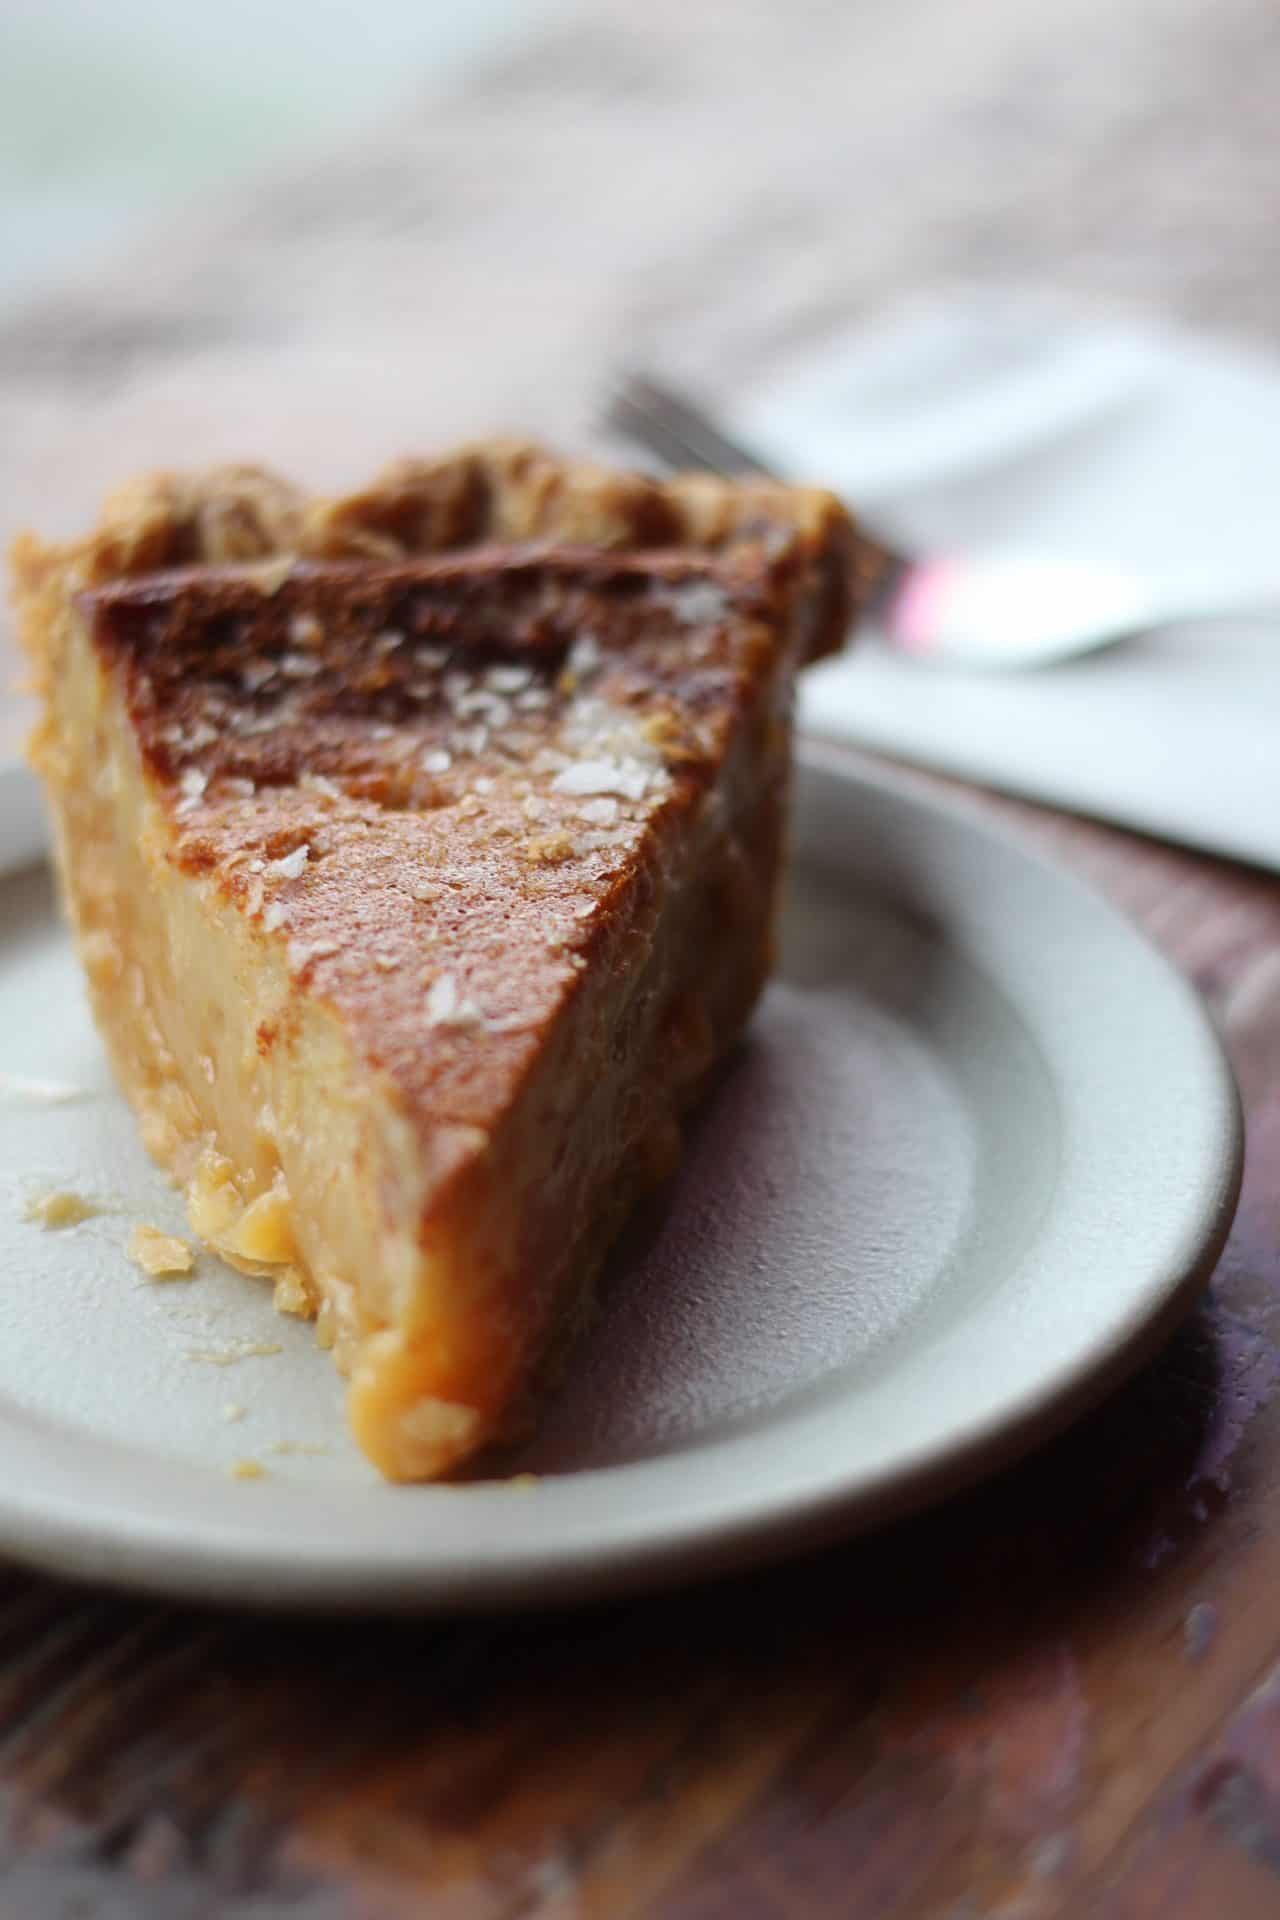 Cozy up with a slice of the best pie in Portland, whether you're into cherry, chocolate, or key lime. We've rounded up our favorites here!